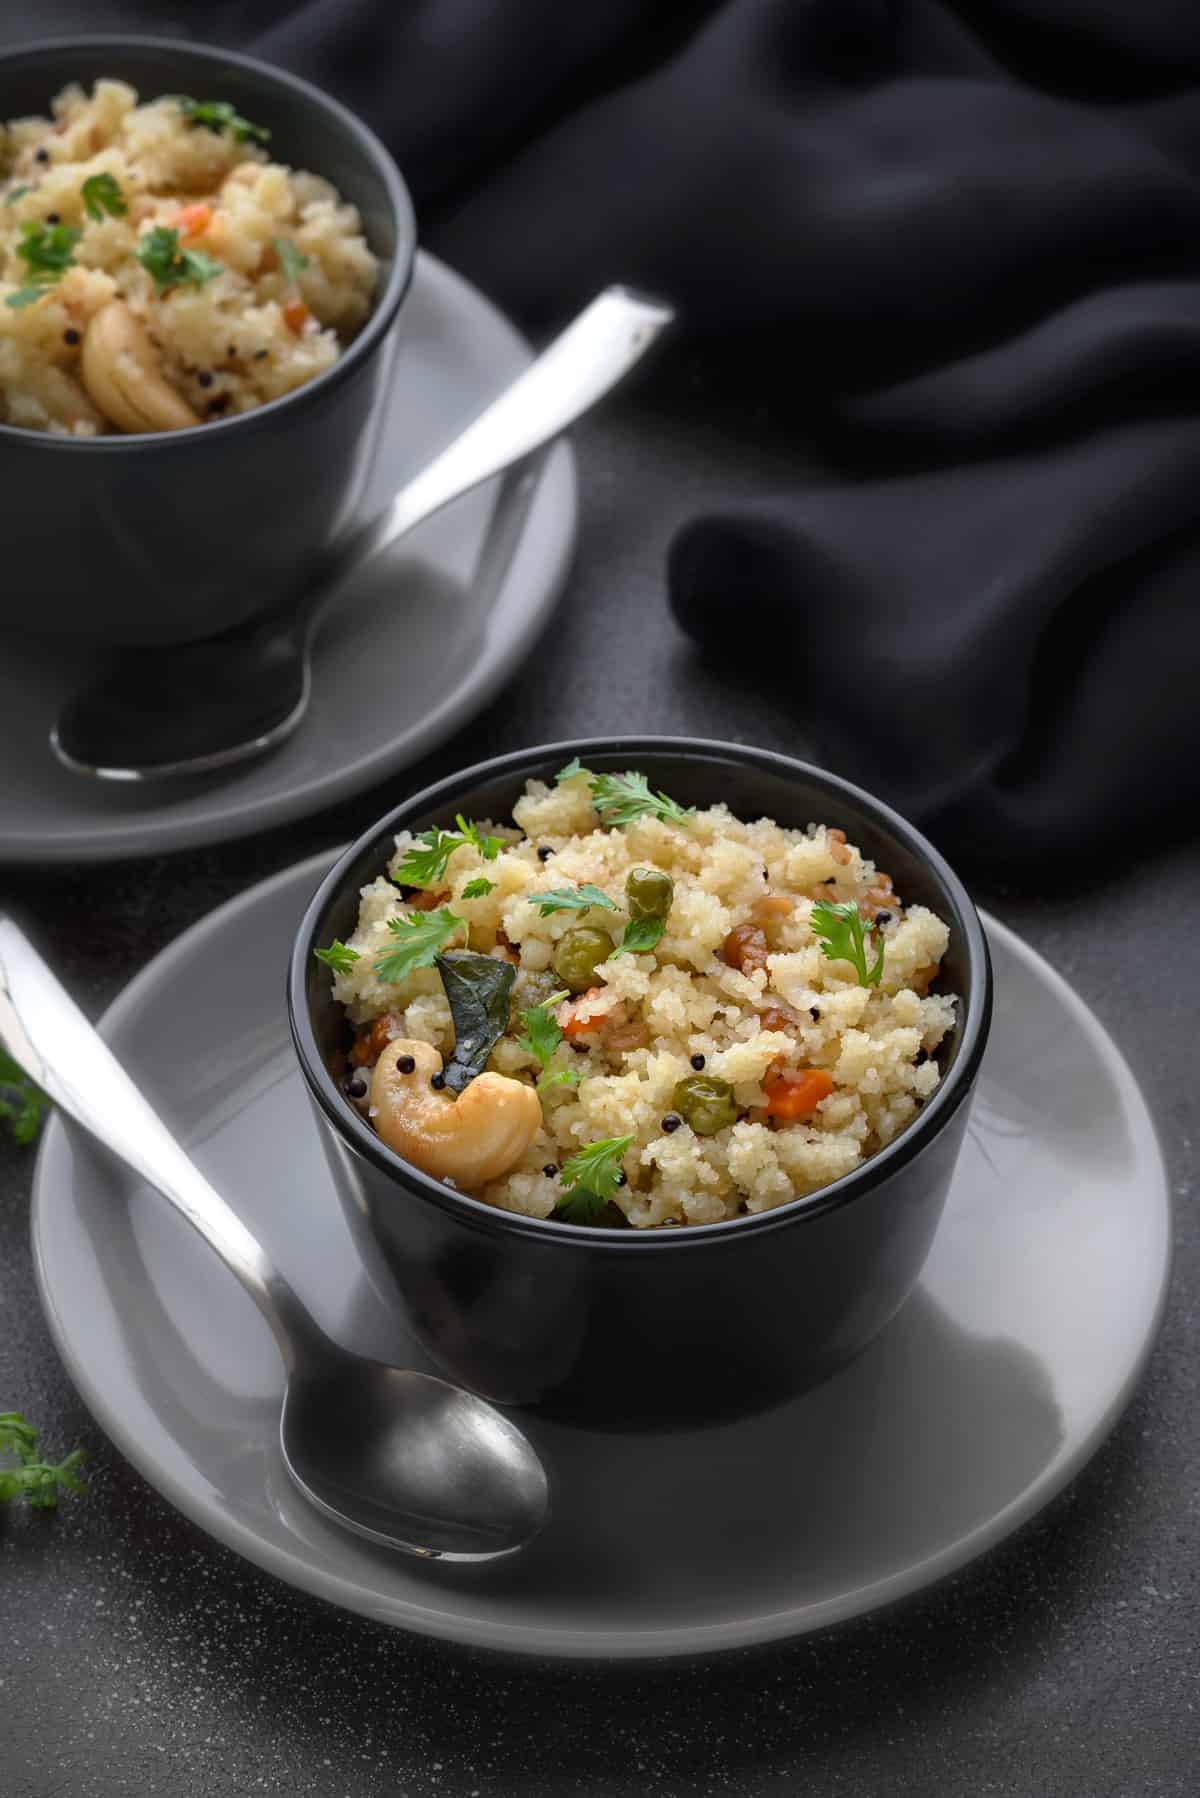 Rava Upma served in two small black bowls, with one spoon each along side.